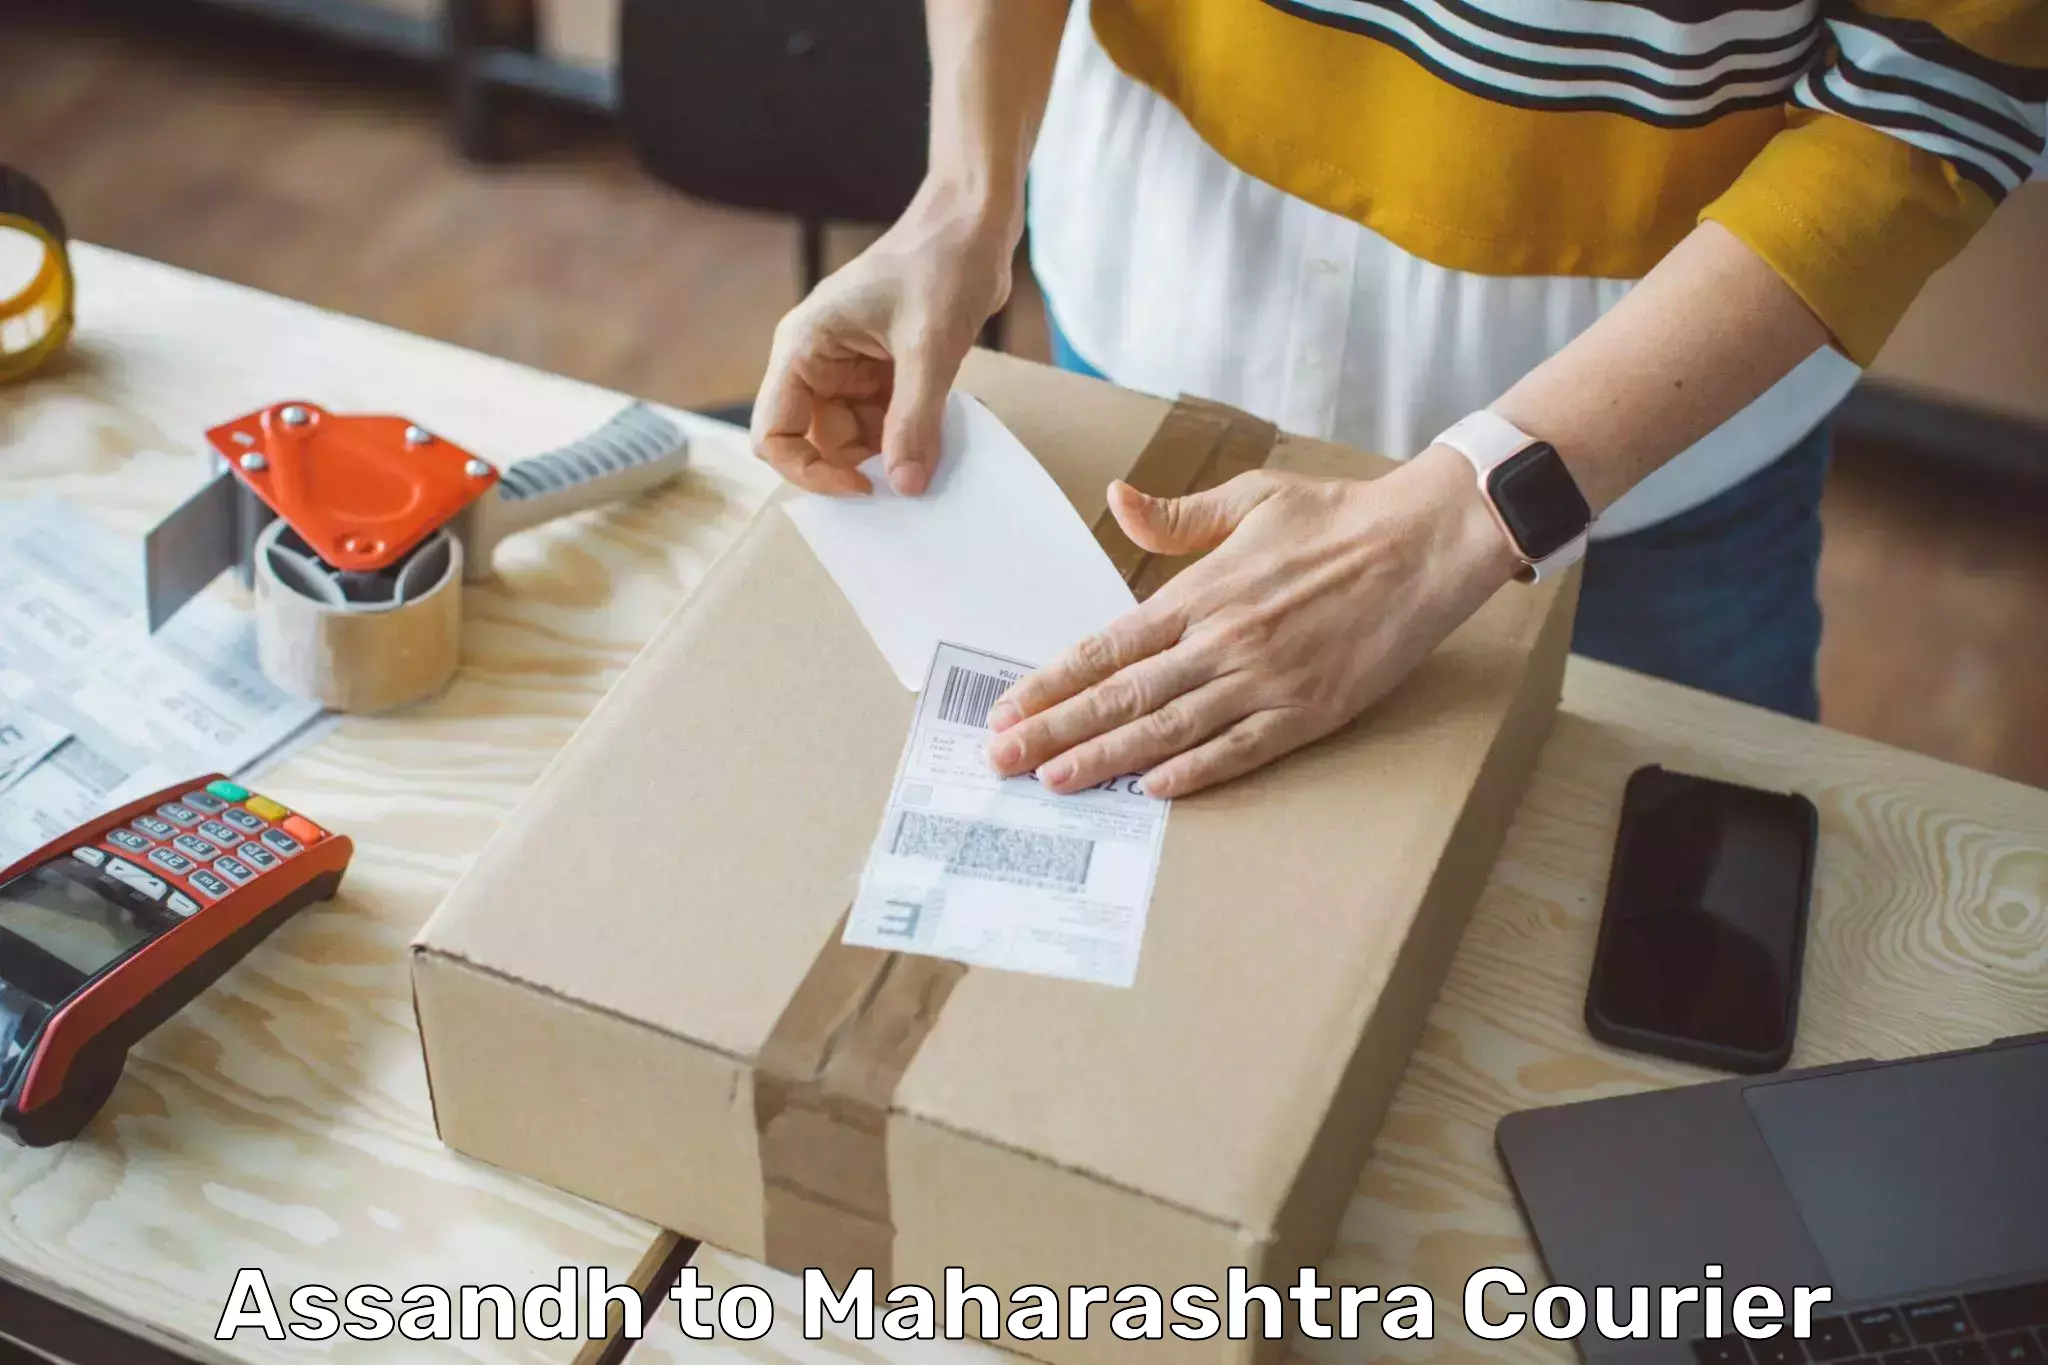 Courier membership in Assandh to Lonavala